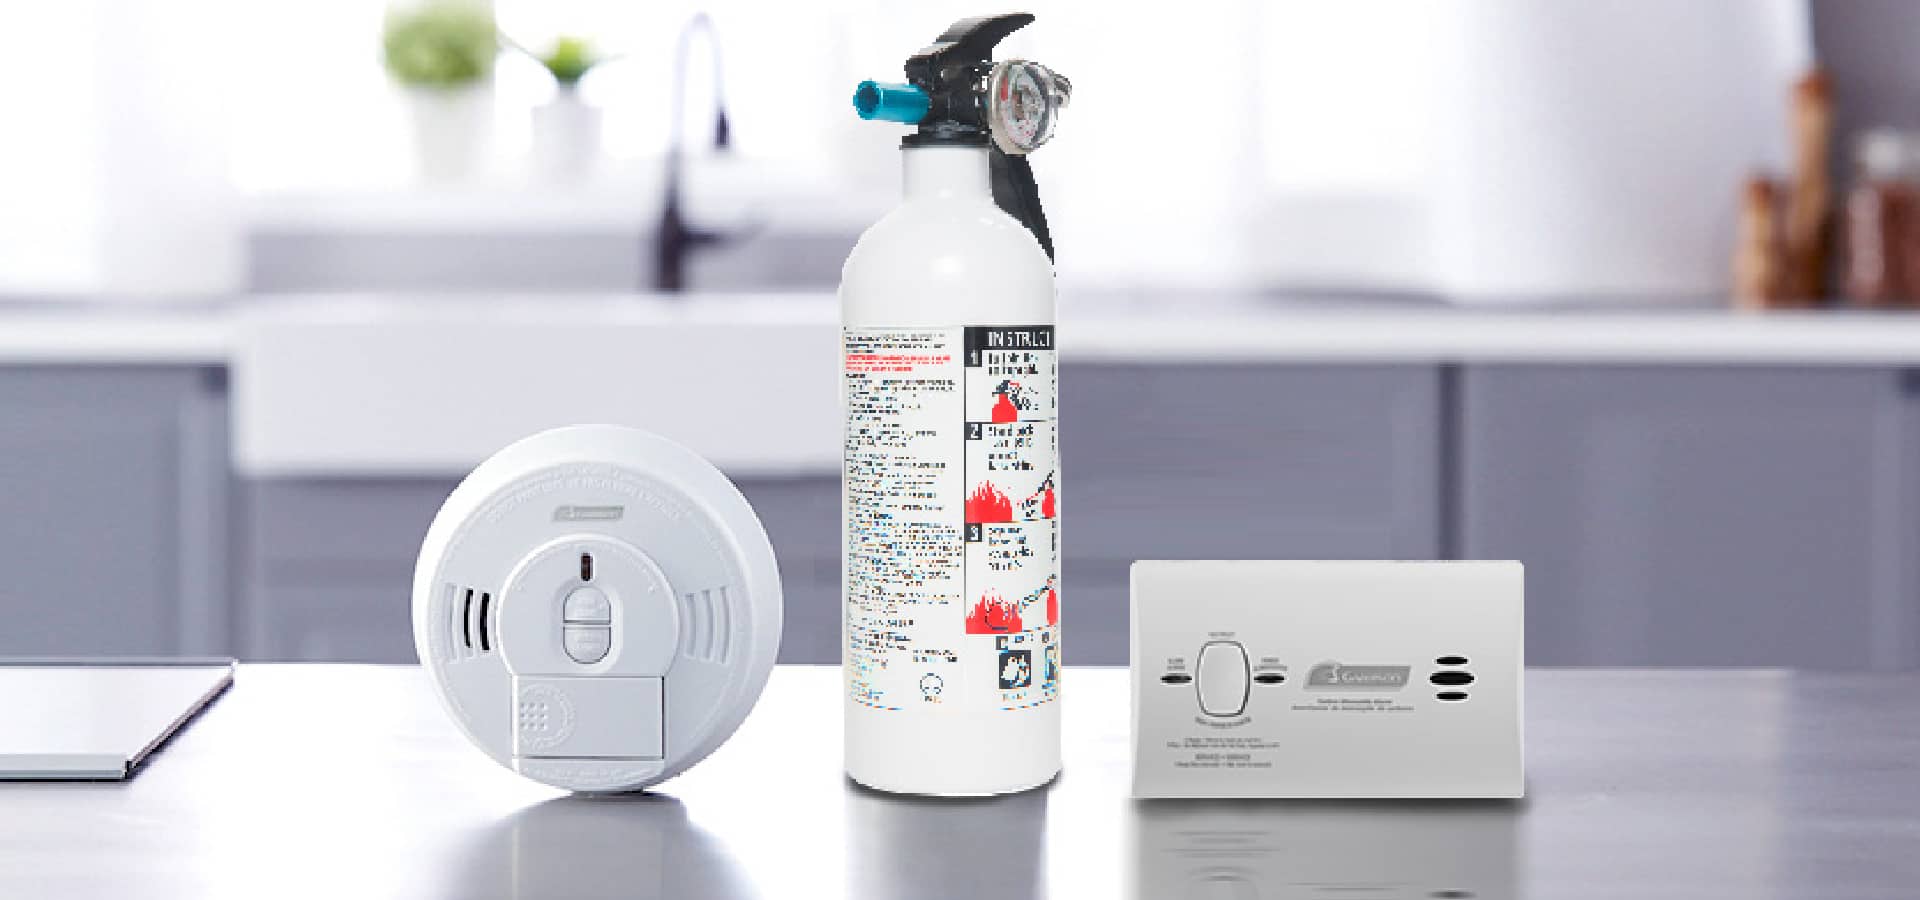 Smoke alarm, fire extinguisher and CO alarm on kitchen counter 